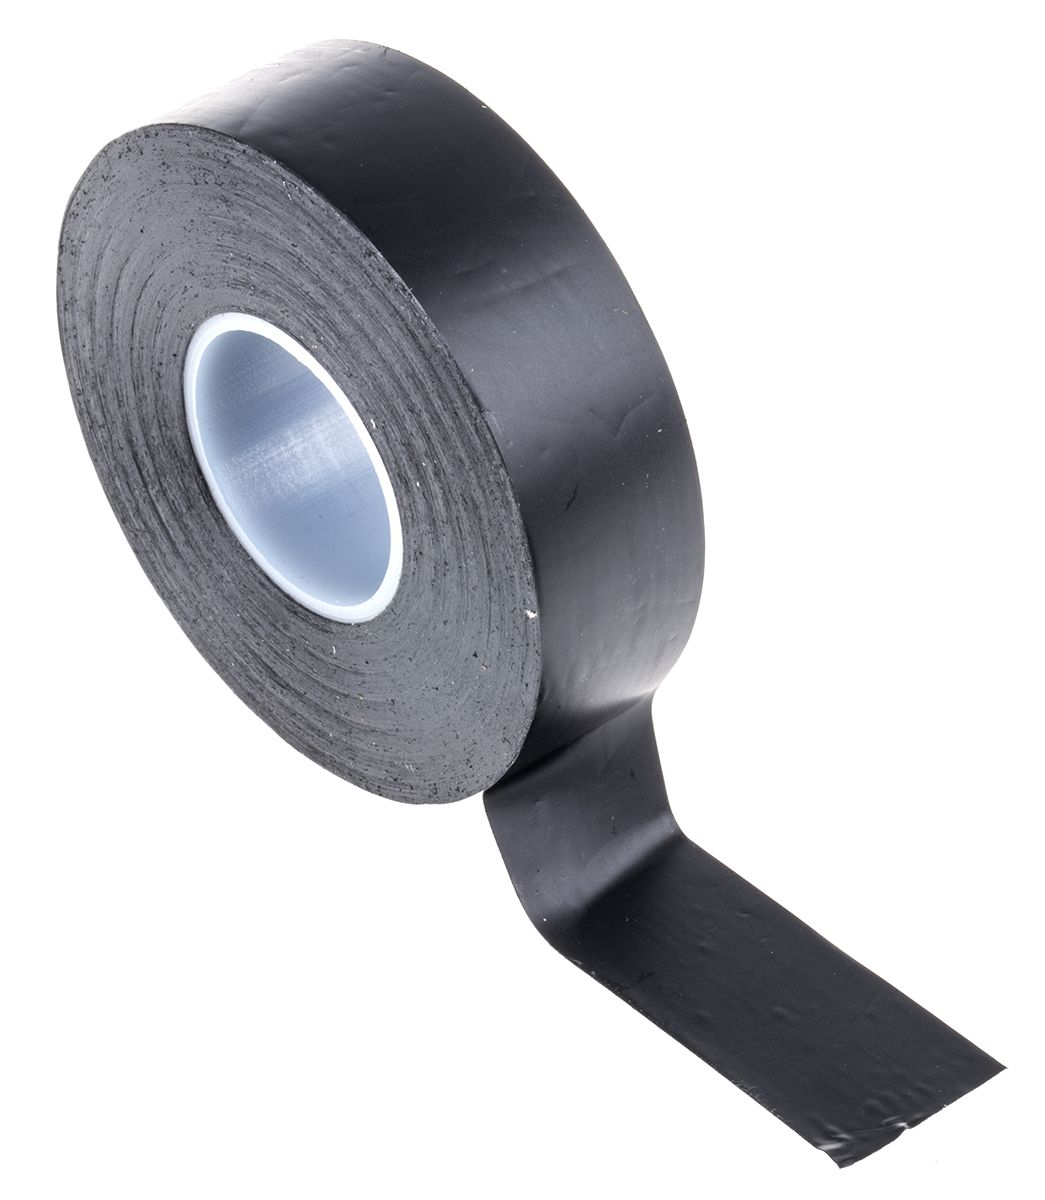 Nastro isolante Advance Tapes AT7 in PVC, 19mm x 20m x 0.13mm